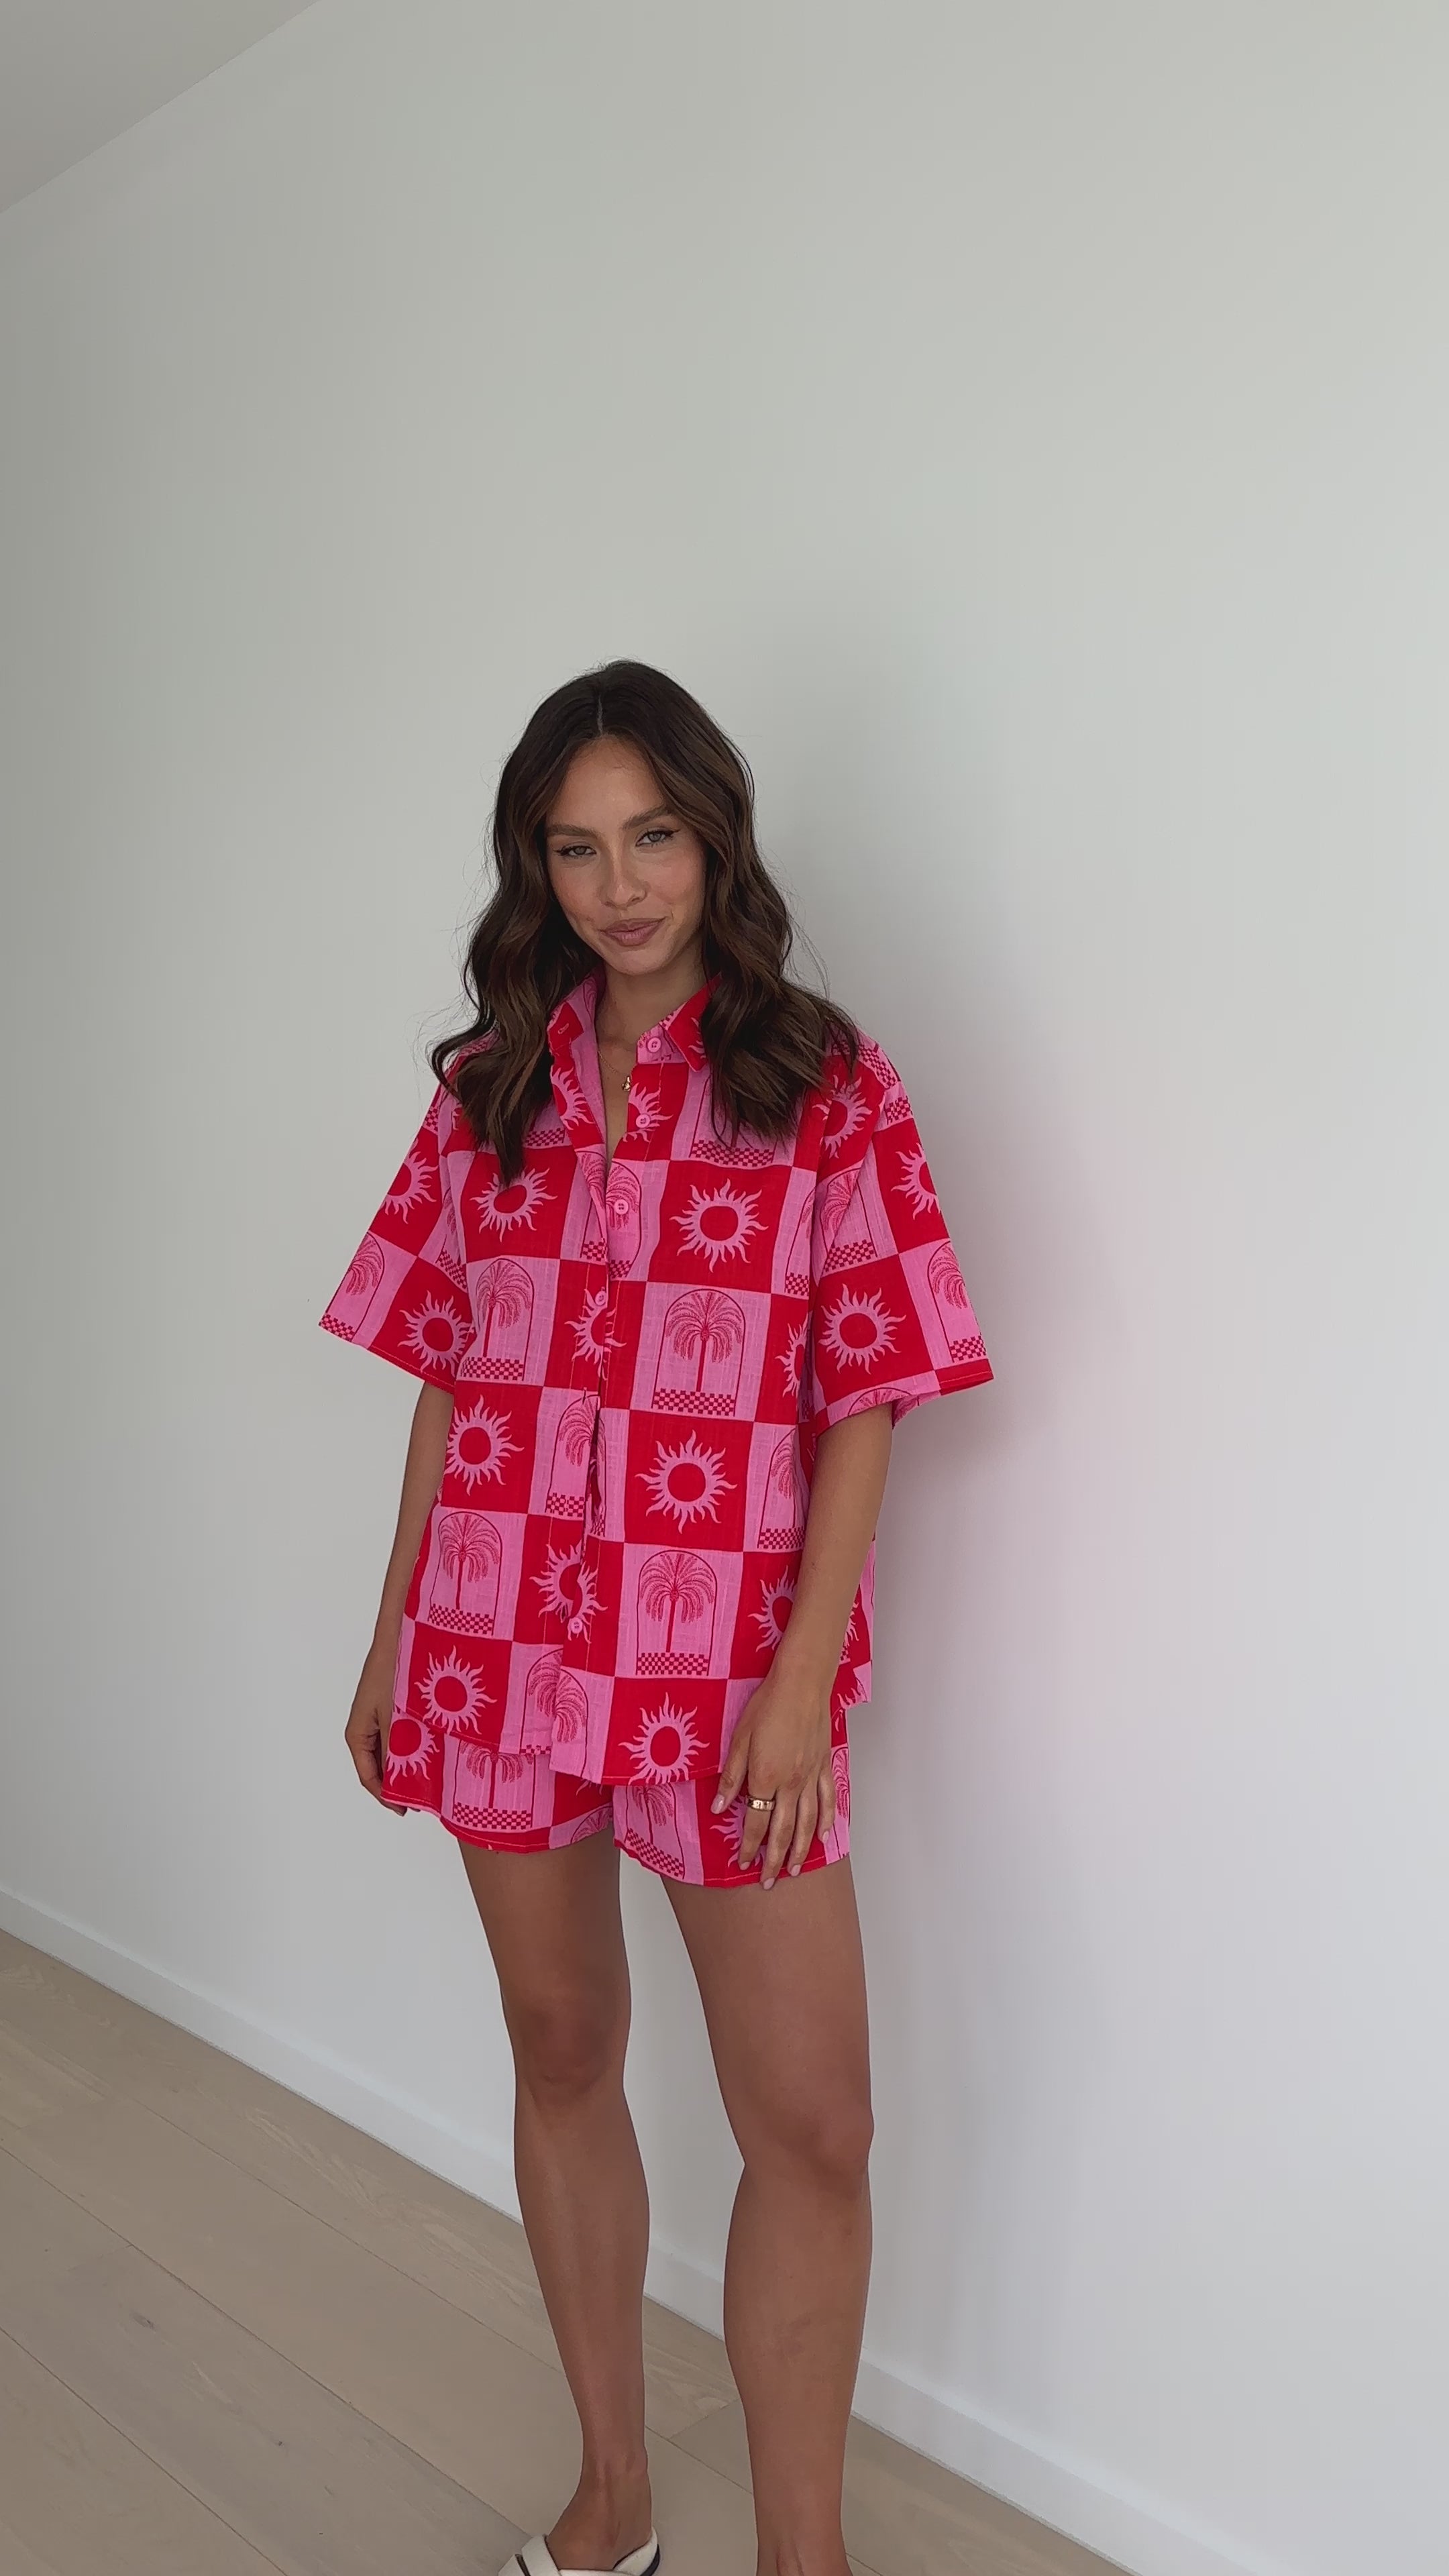 Charli Button Up Shirt and Shorts - Pink/Red Sun Palm Checkers Print